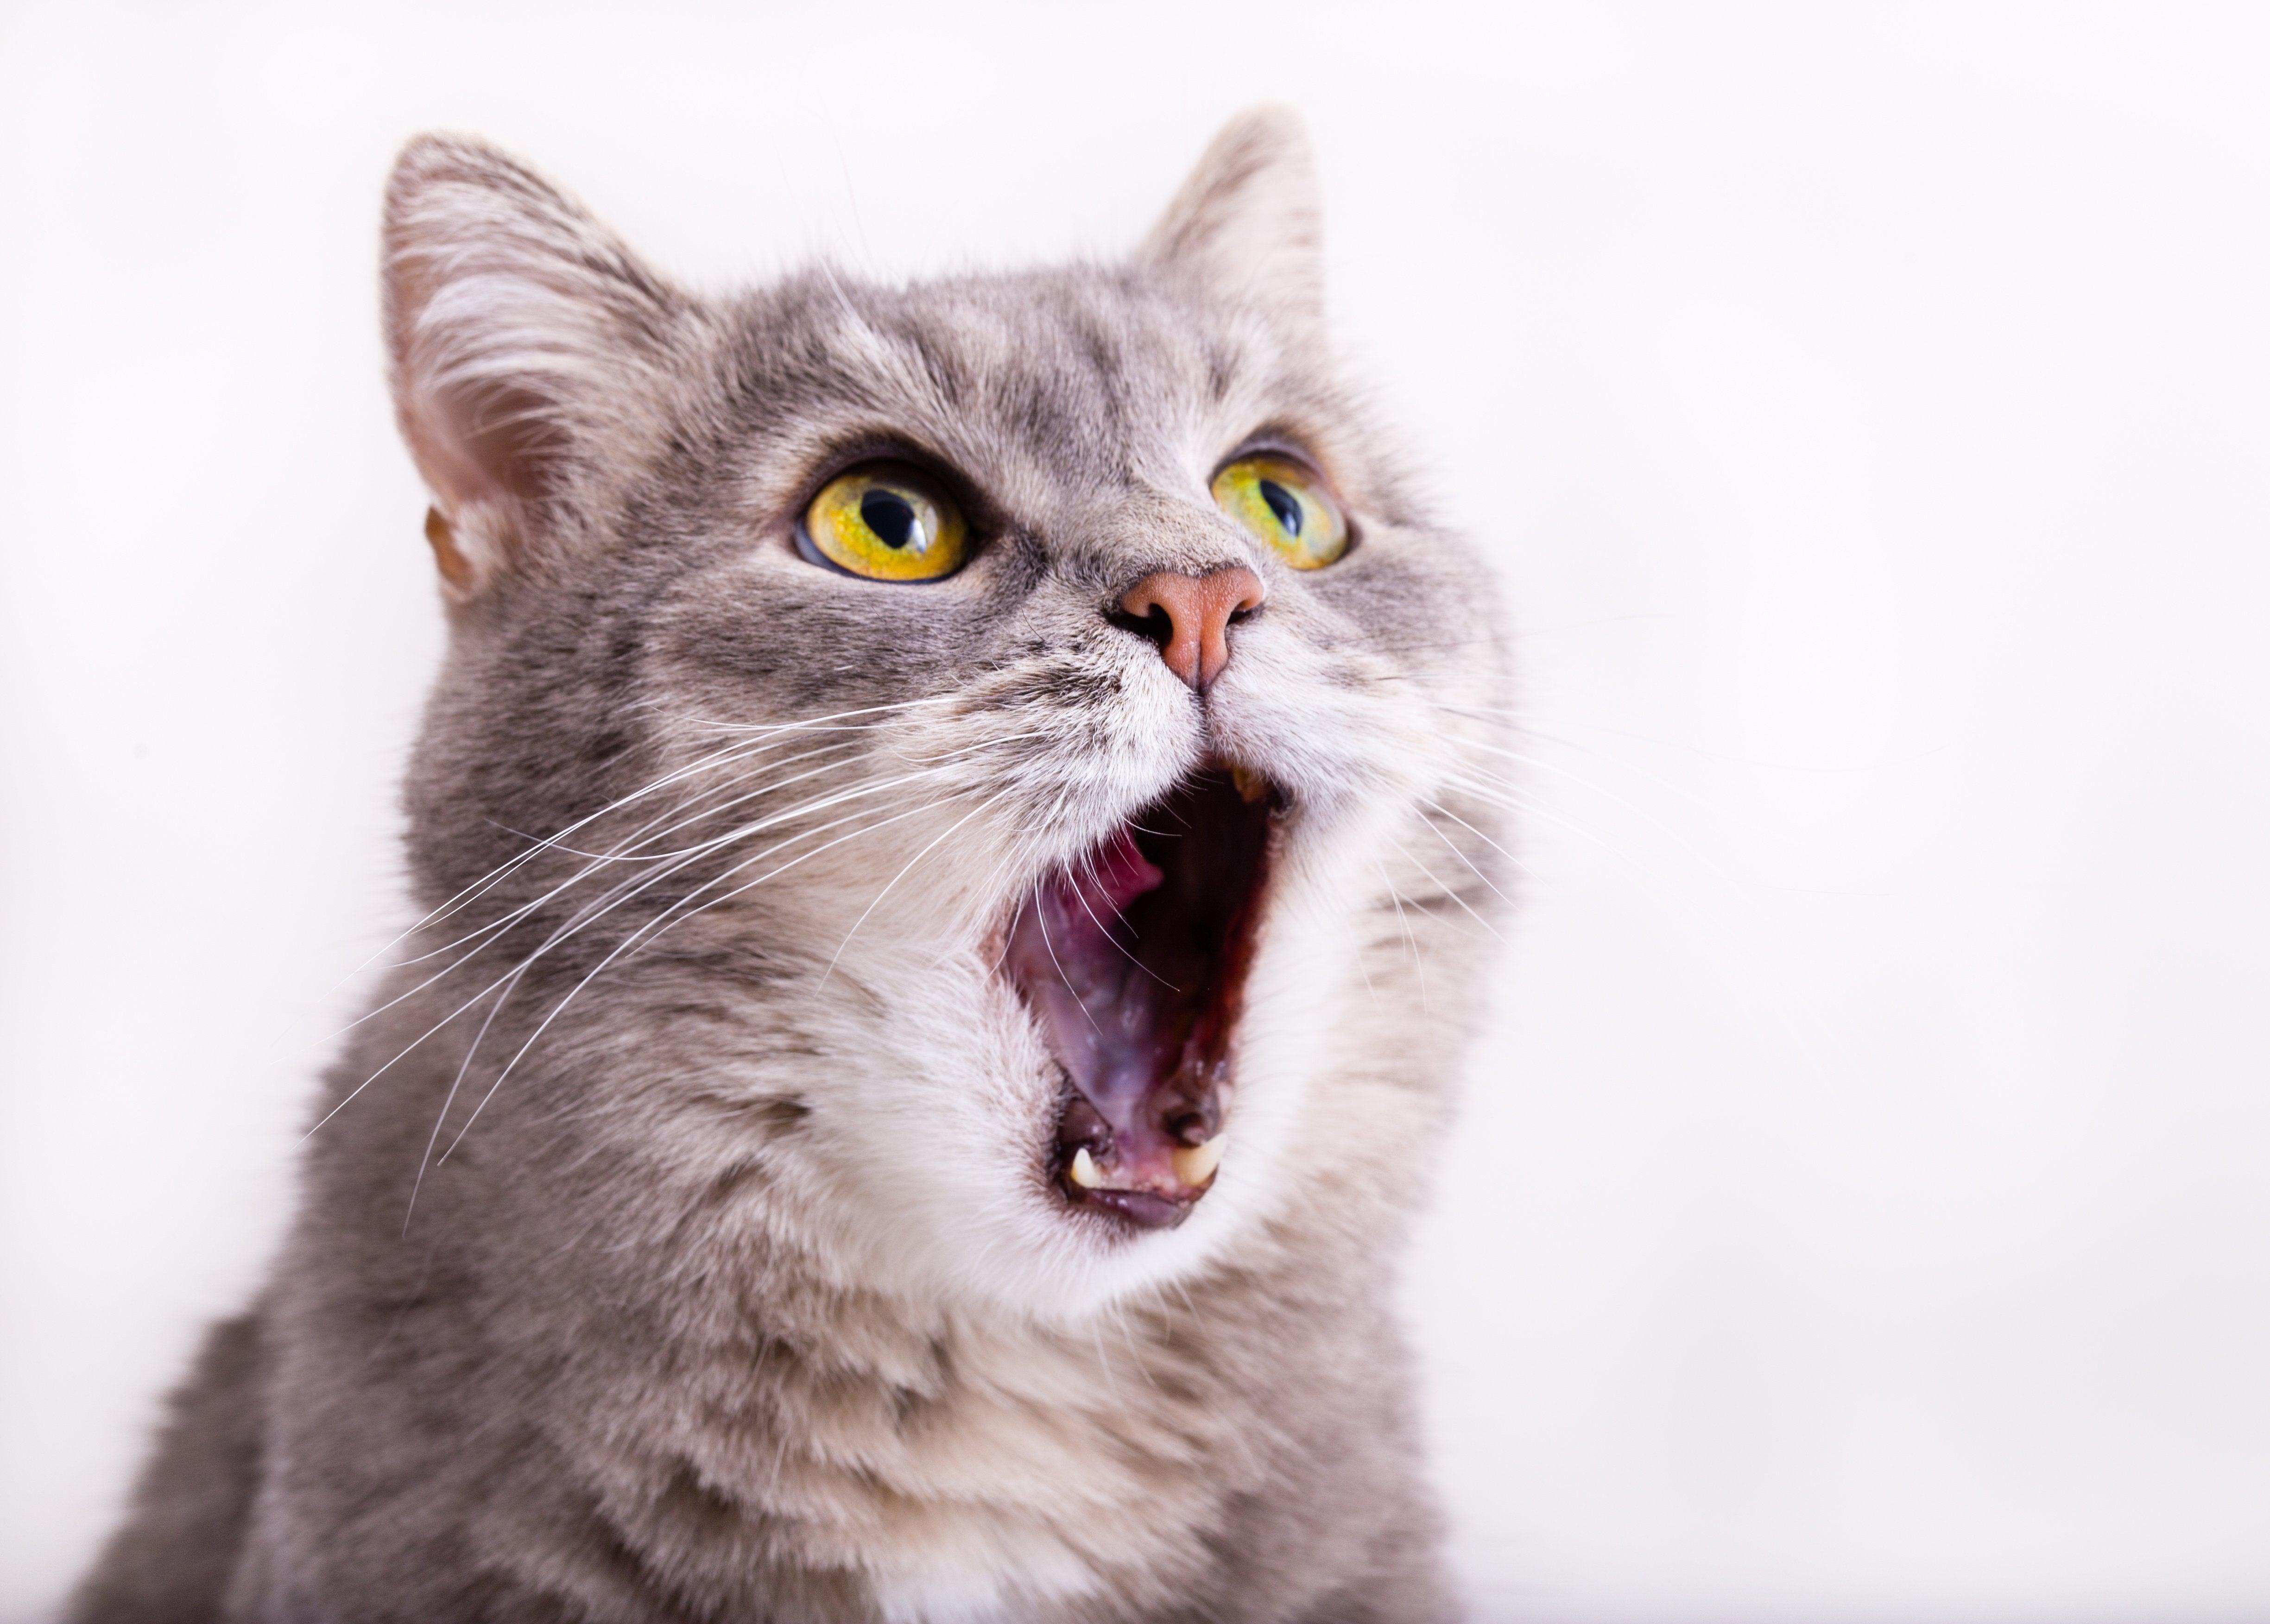 A cat captured mid-meow, offering a glimpse into its expressive and vocal personality. Cat With Open Mouth - Diamondartlove